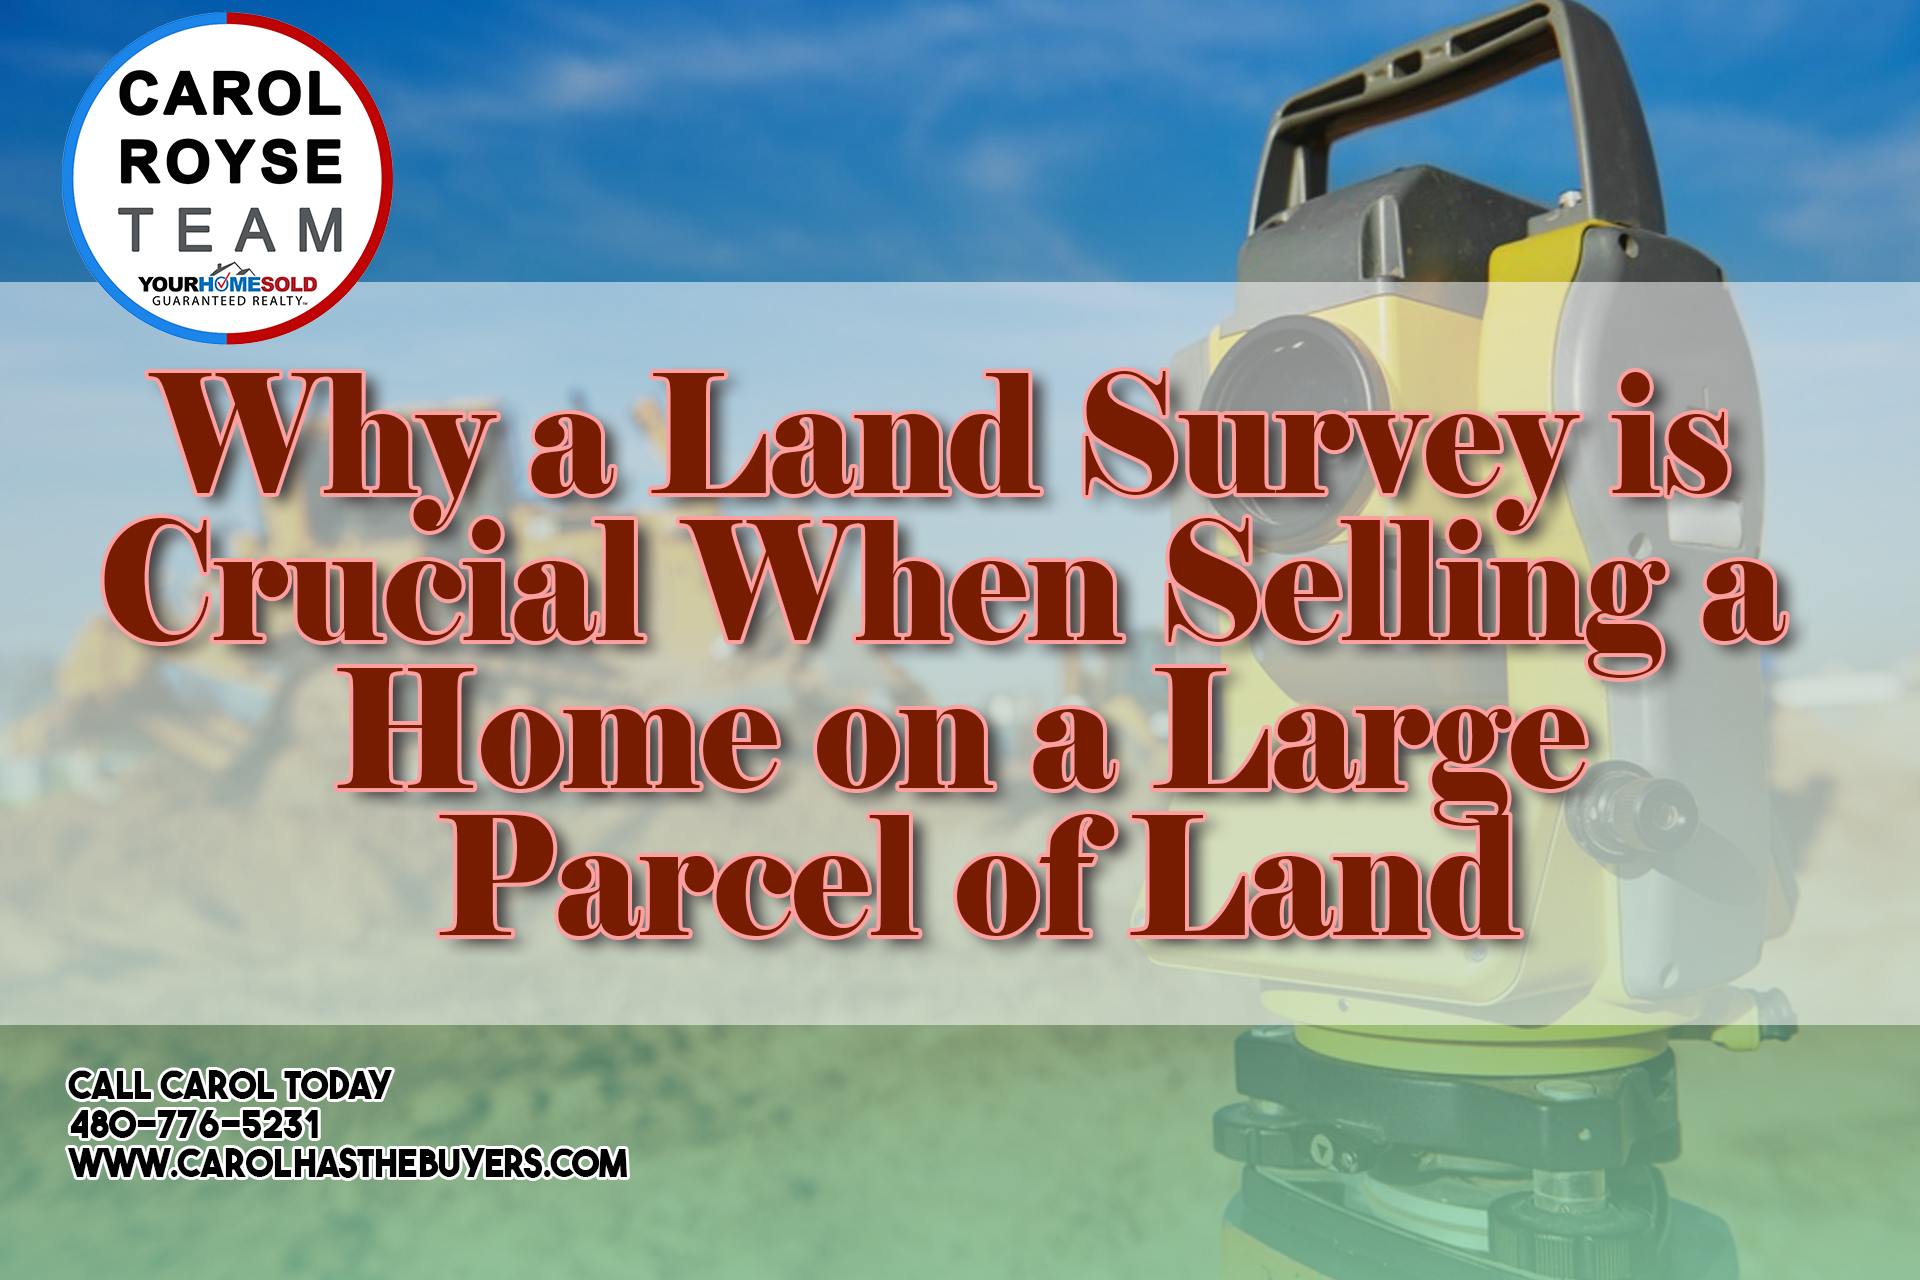 Why a Land Survey is Crucial When Selling a Home on a Large Parcel of Land